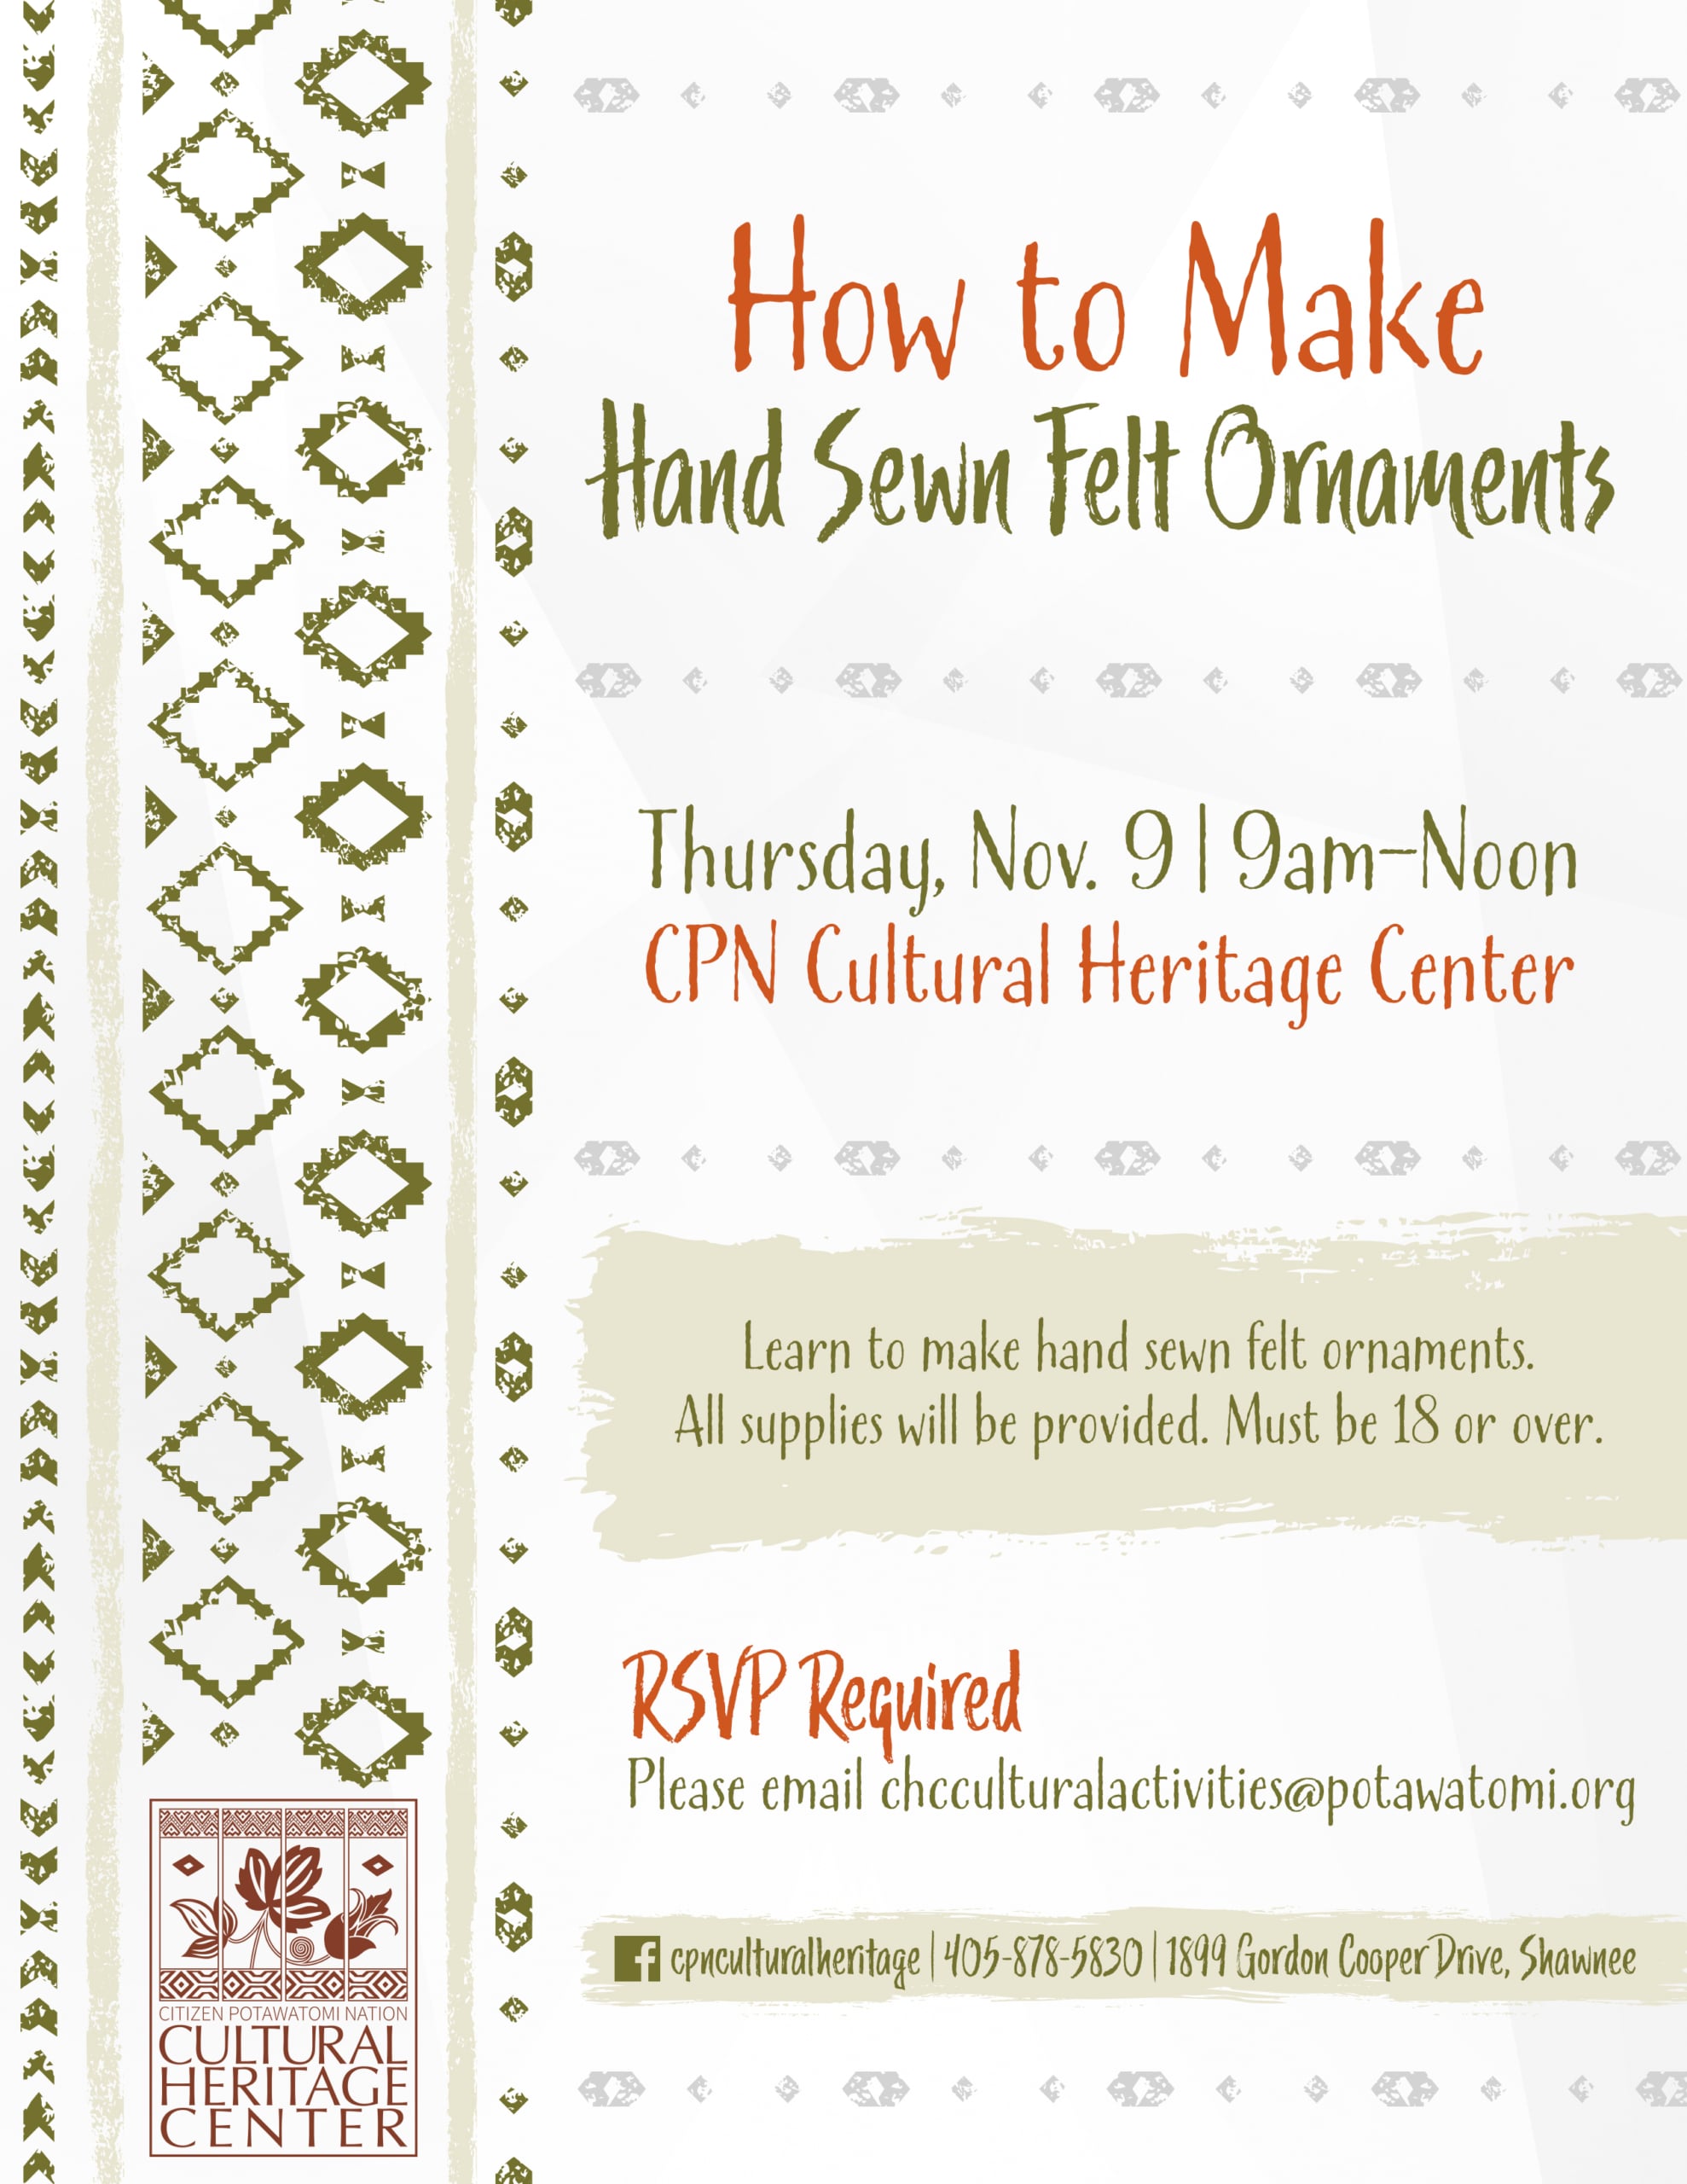 Green and orange text with geometric patterns announces the Nov. 9 2023 hand sewn felt ornaments class.